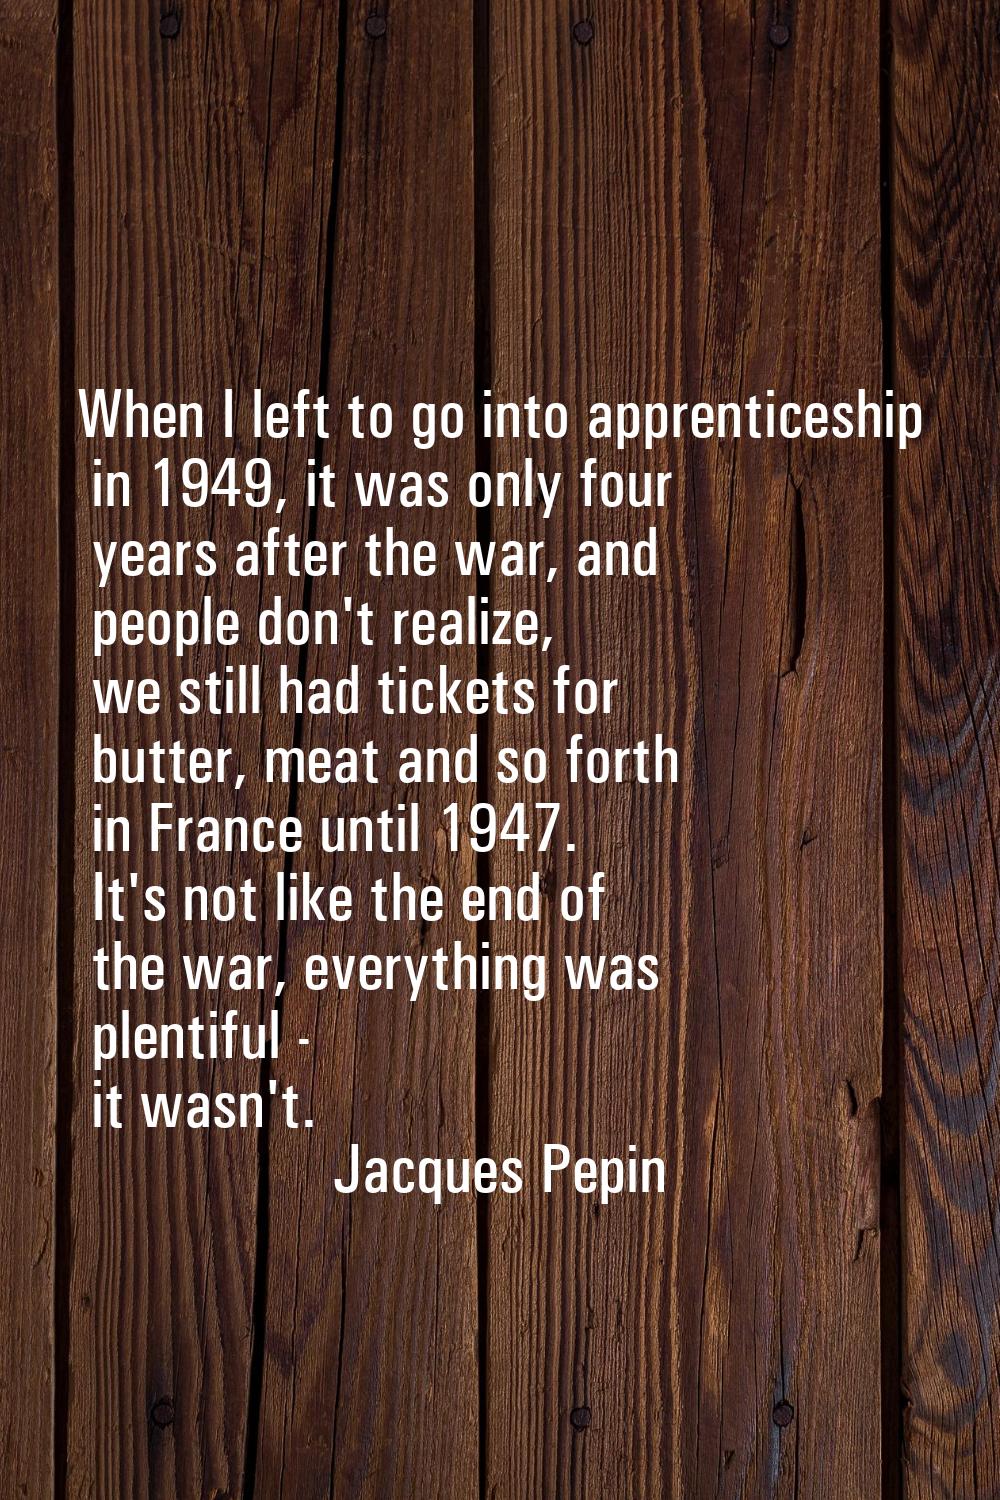 When I left to go into apprenticeship in 1949, it was only four years after the war, and people don